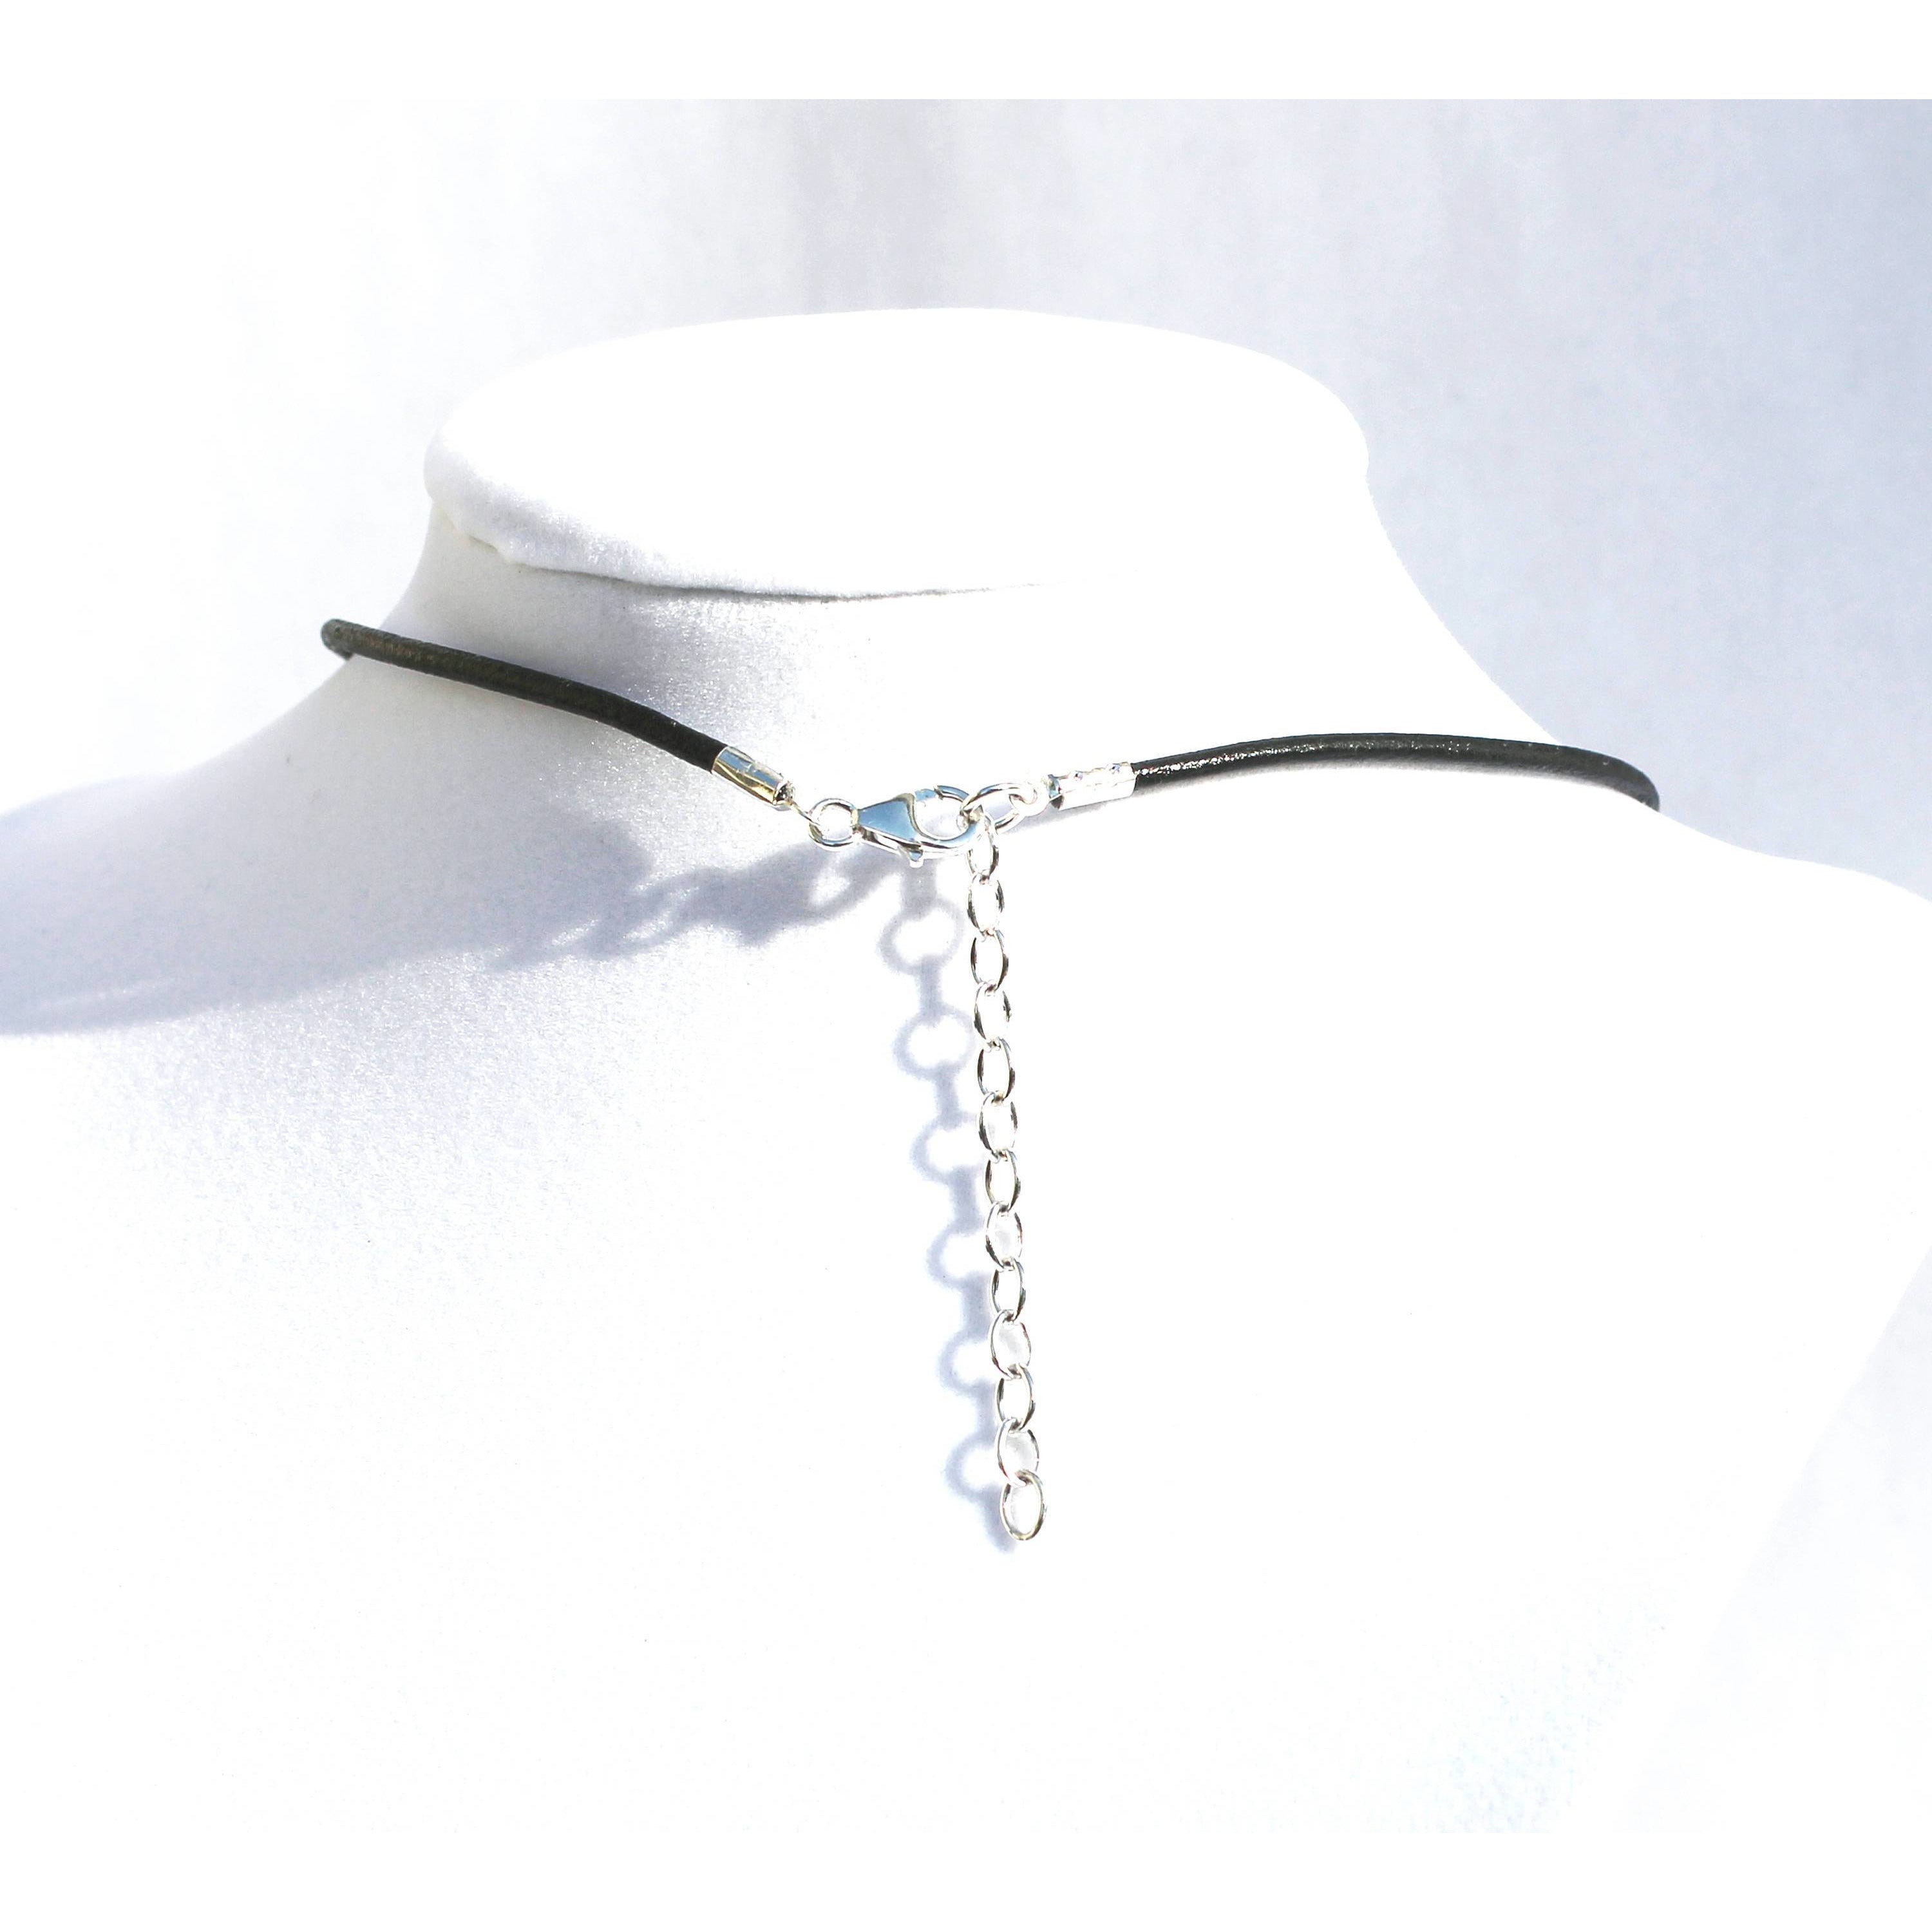 Discrete Day collar choker, Sterling Silver O Ring, Leather Cord, Unisex-Day Collar, Public Collar, Submissive Necklace